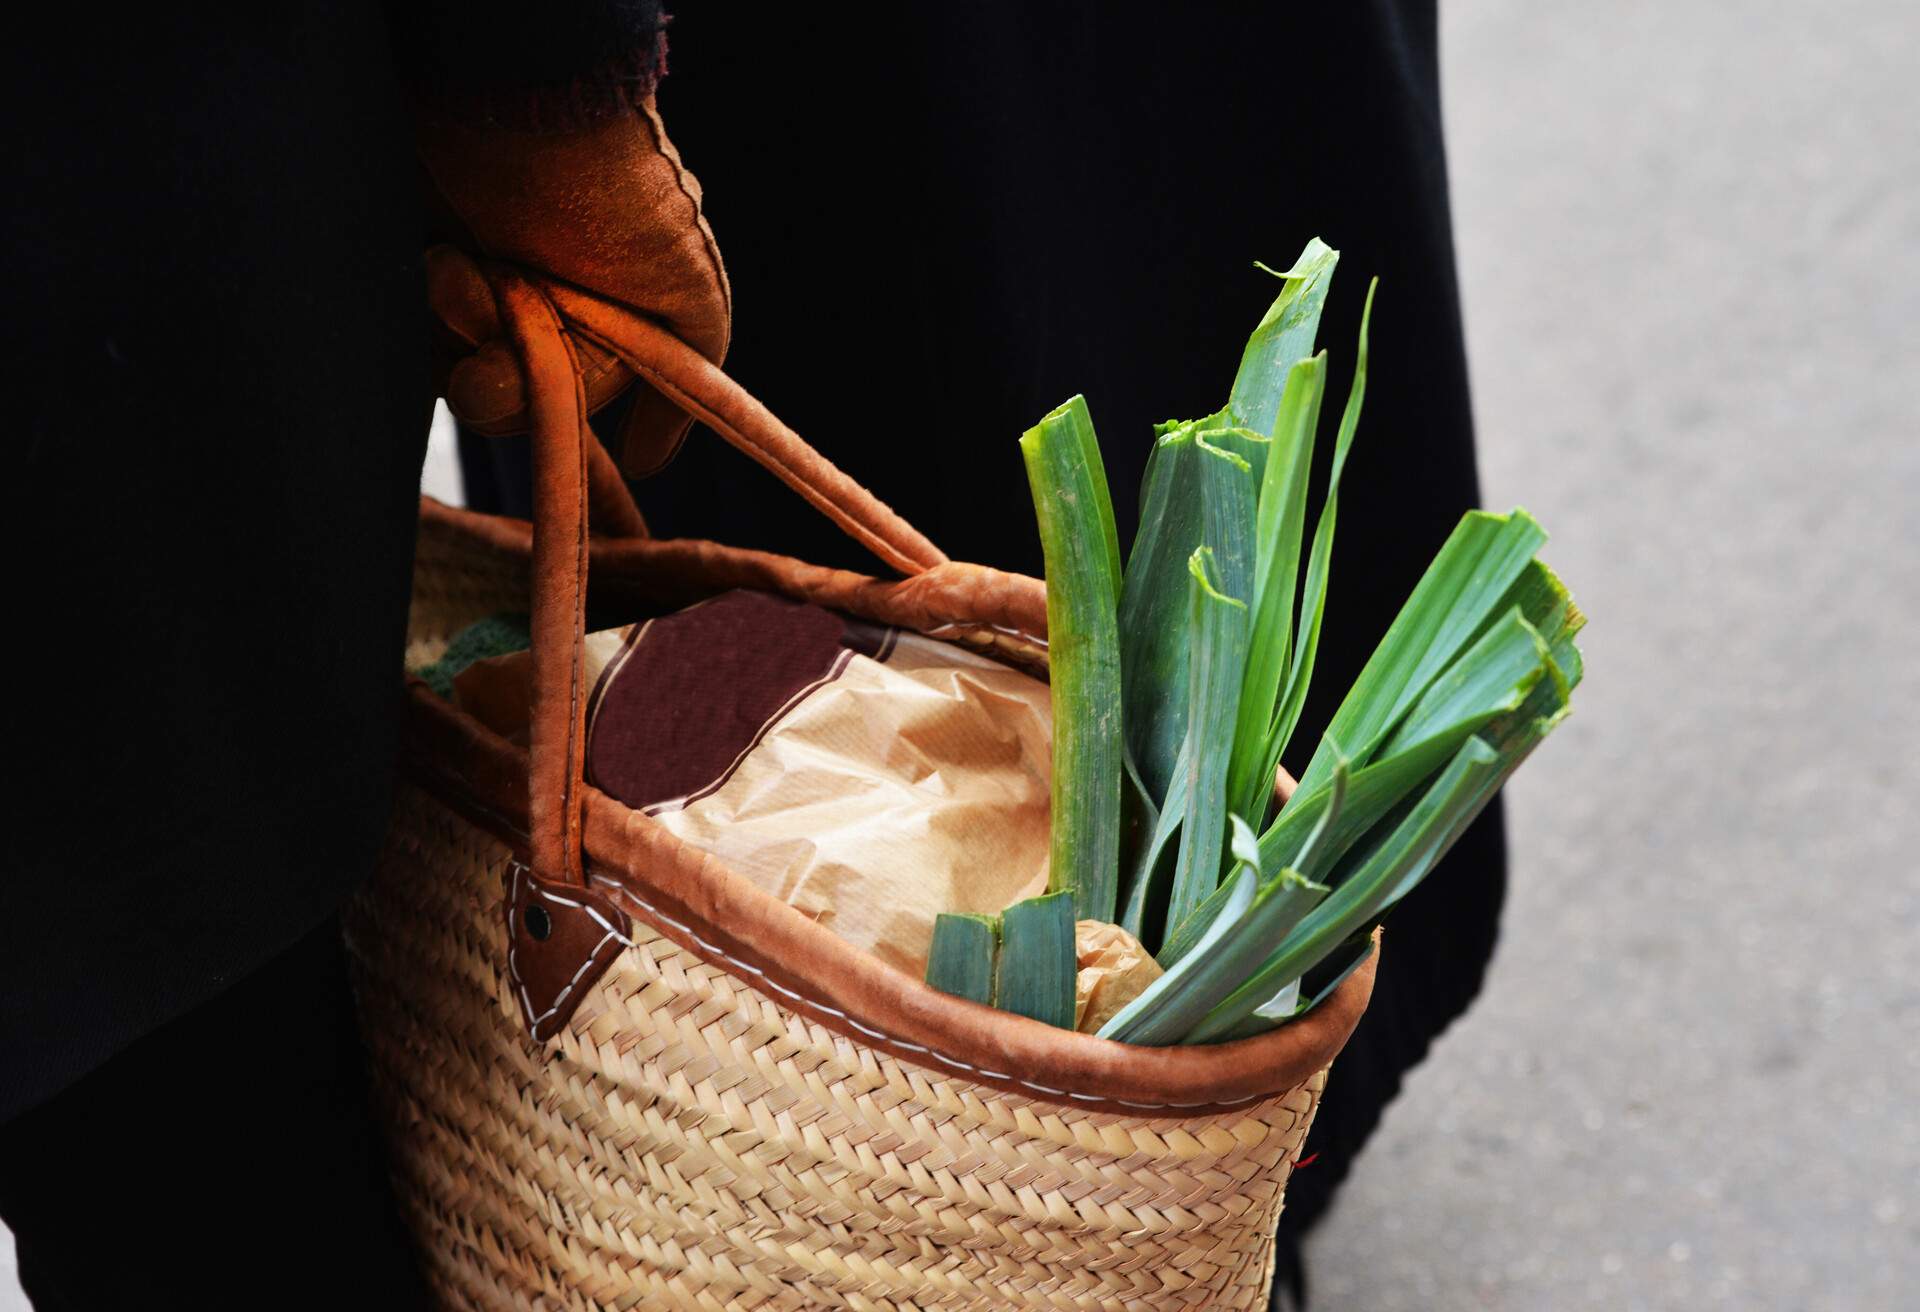 leek in a straw bag in the hands of a woman